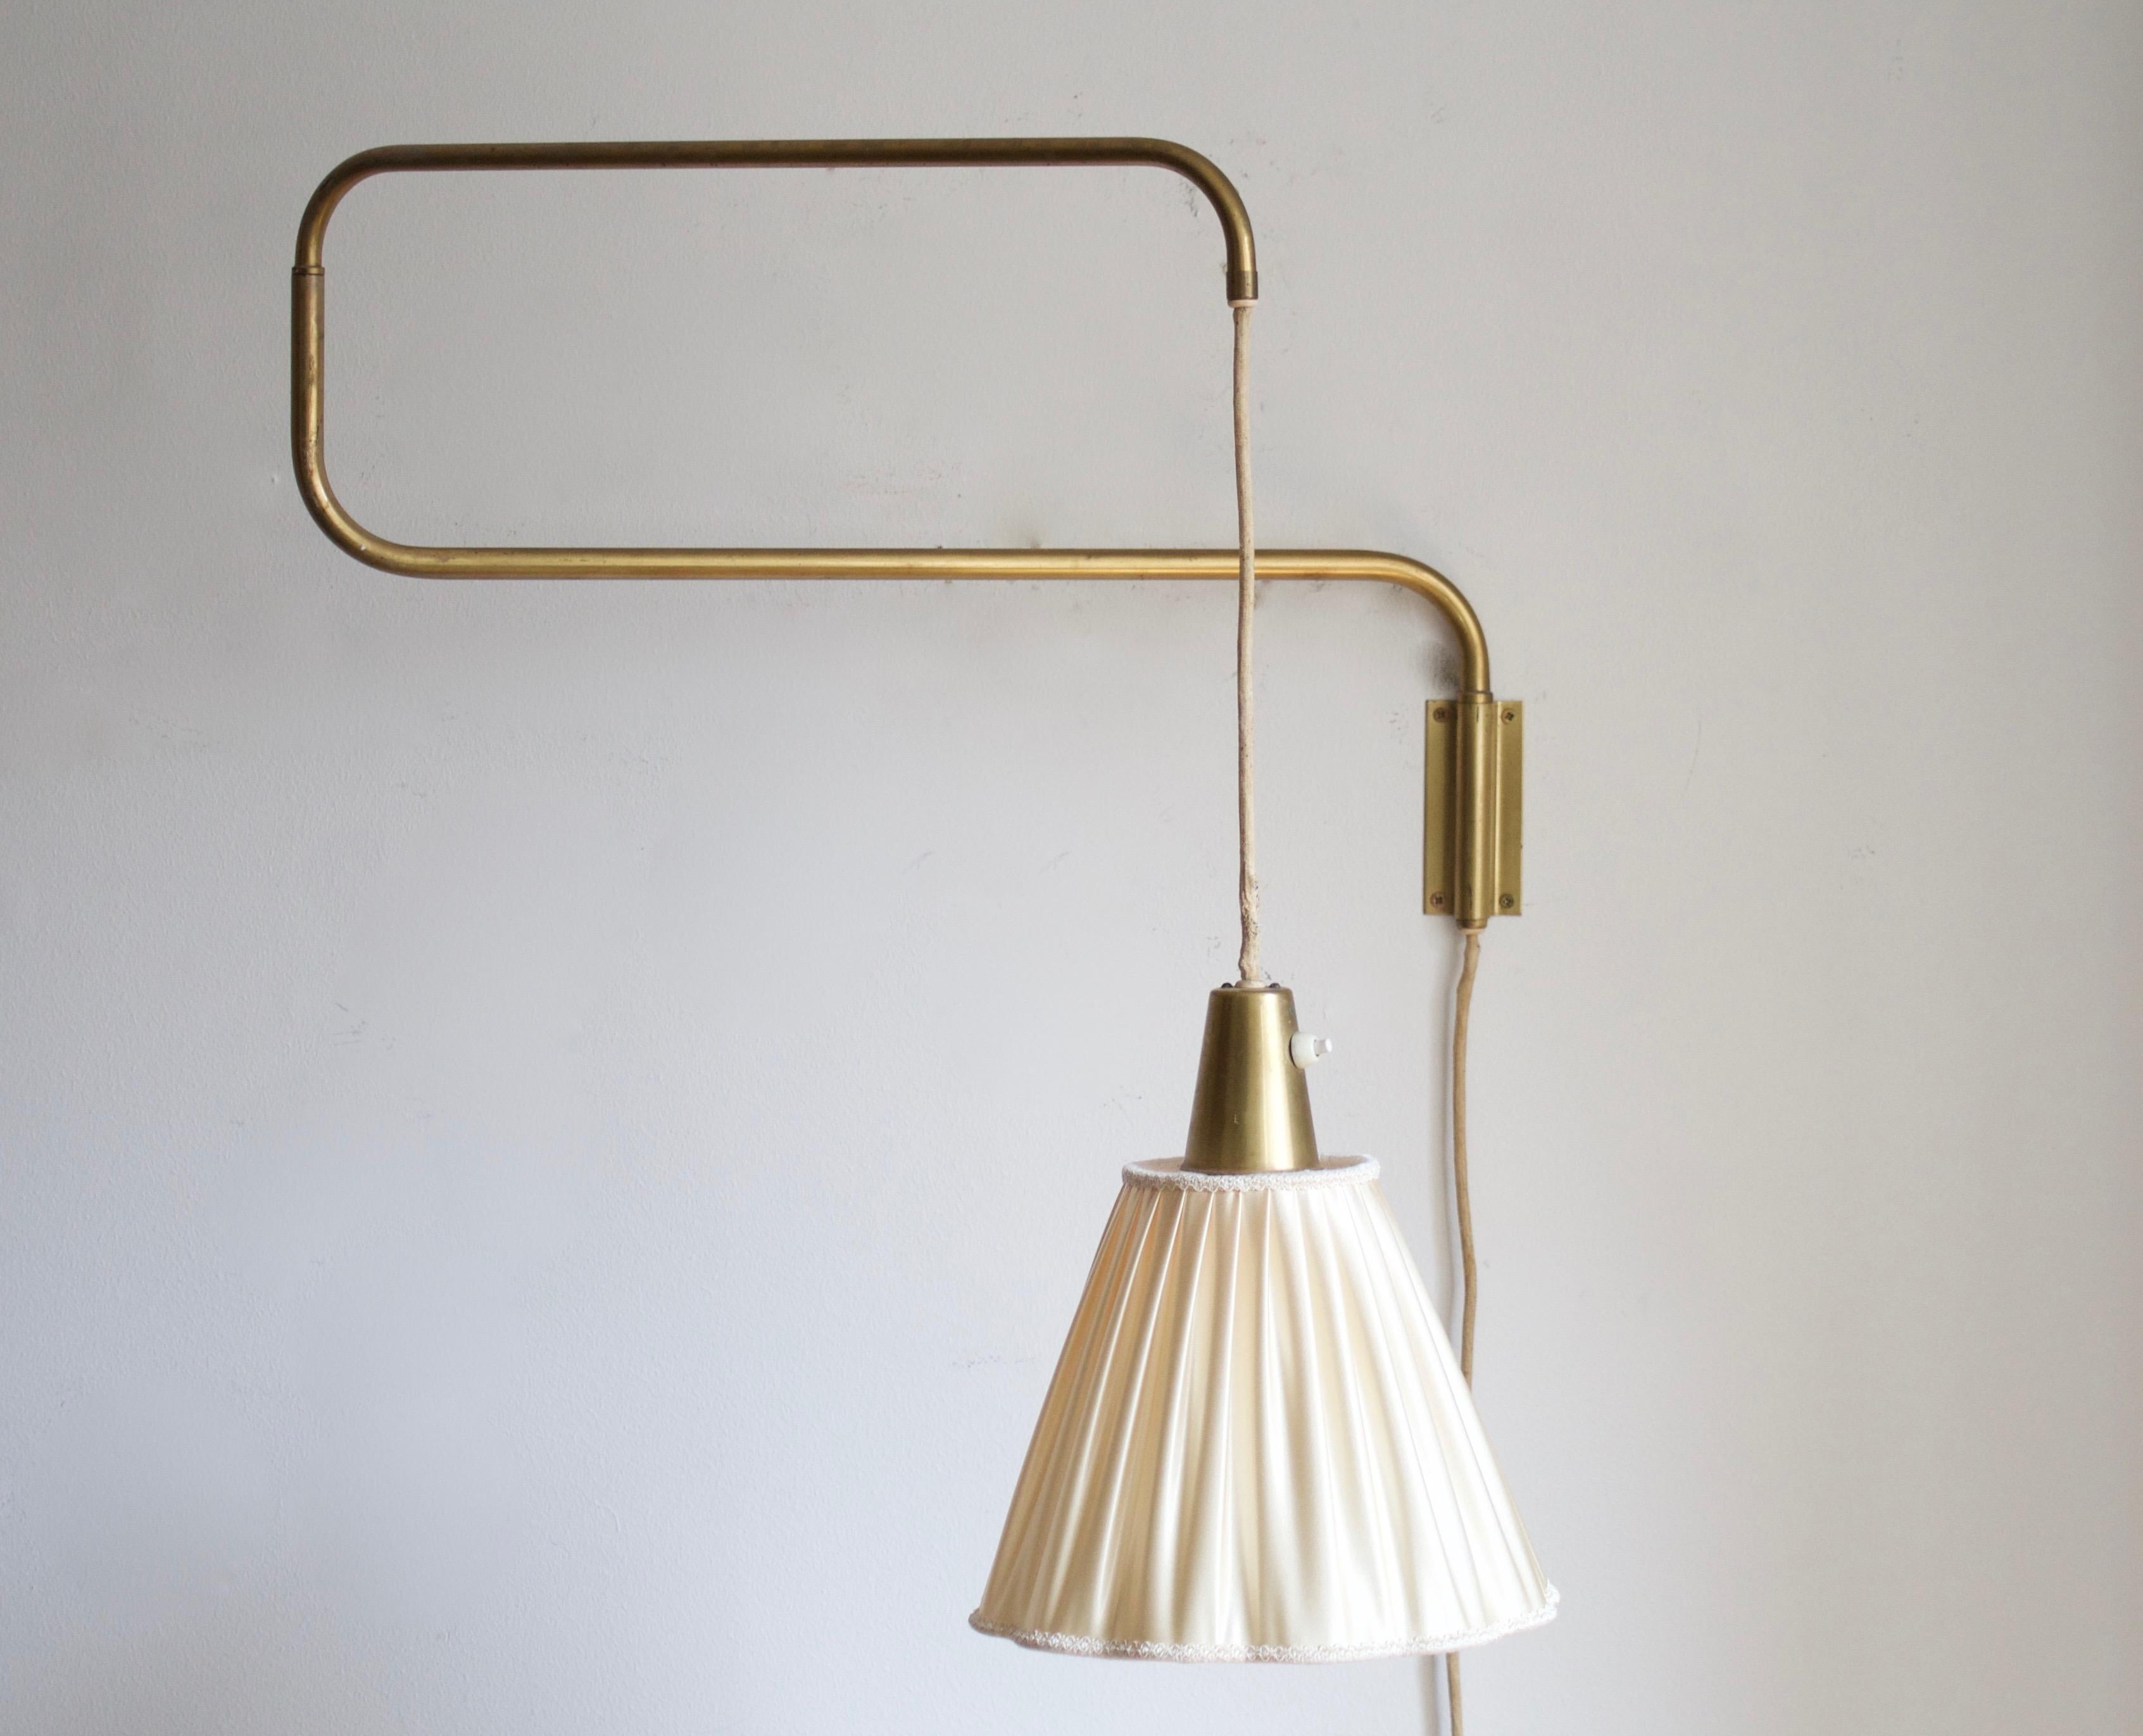 A functionalist wall light / task light, designed and produced in Sweden, 1940s. Features brass. Brand new brass lampshade.

Stated dimensions with lampshade attached as is illustrated in the primary image.

  